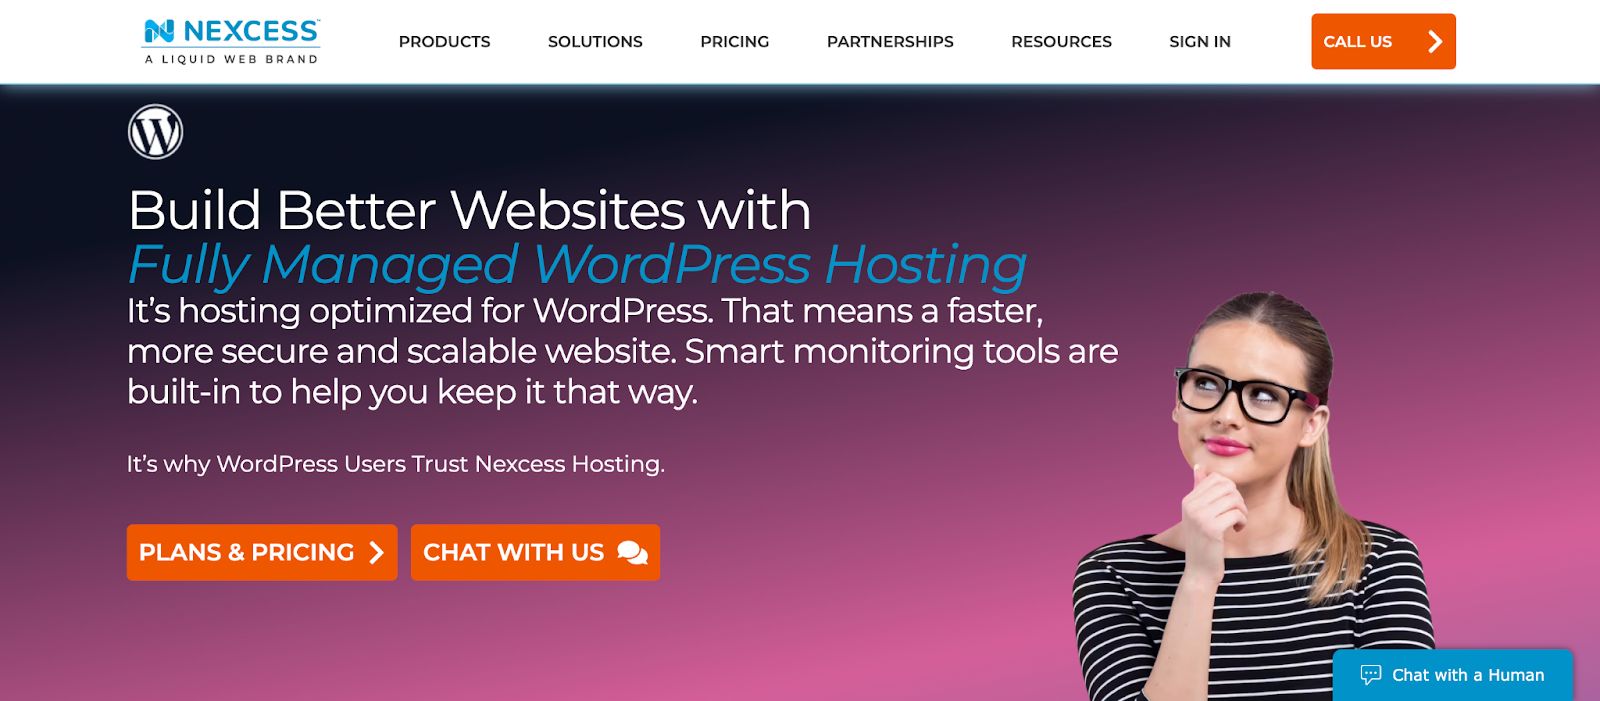 Choosing a reliable web host helps prevent website security threats.